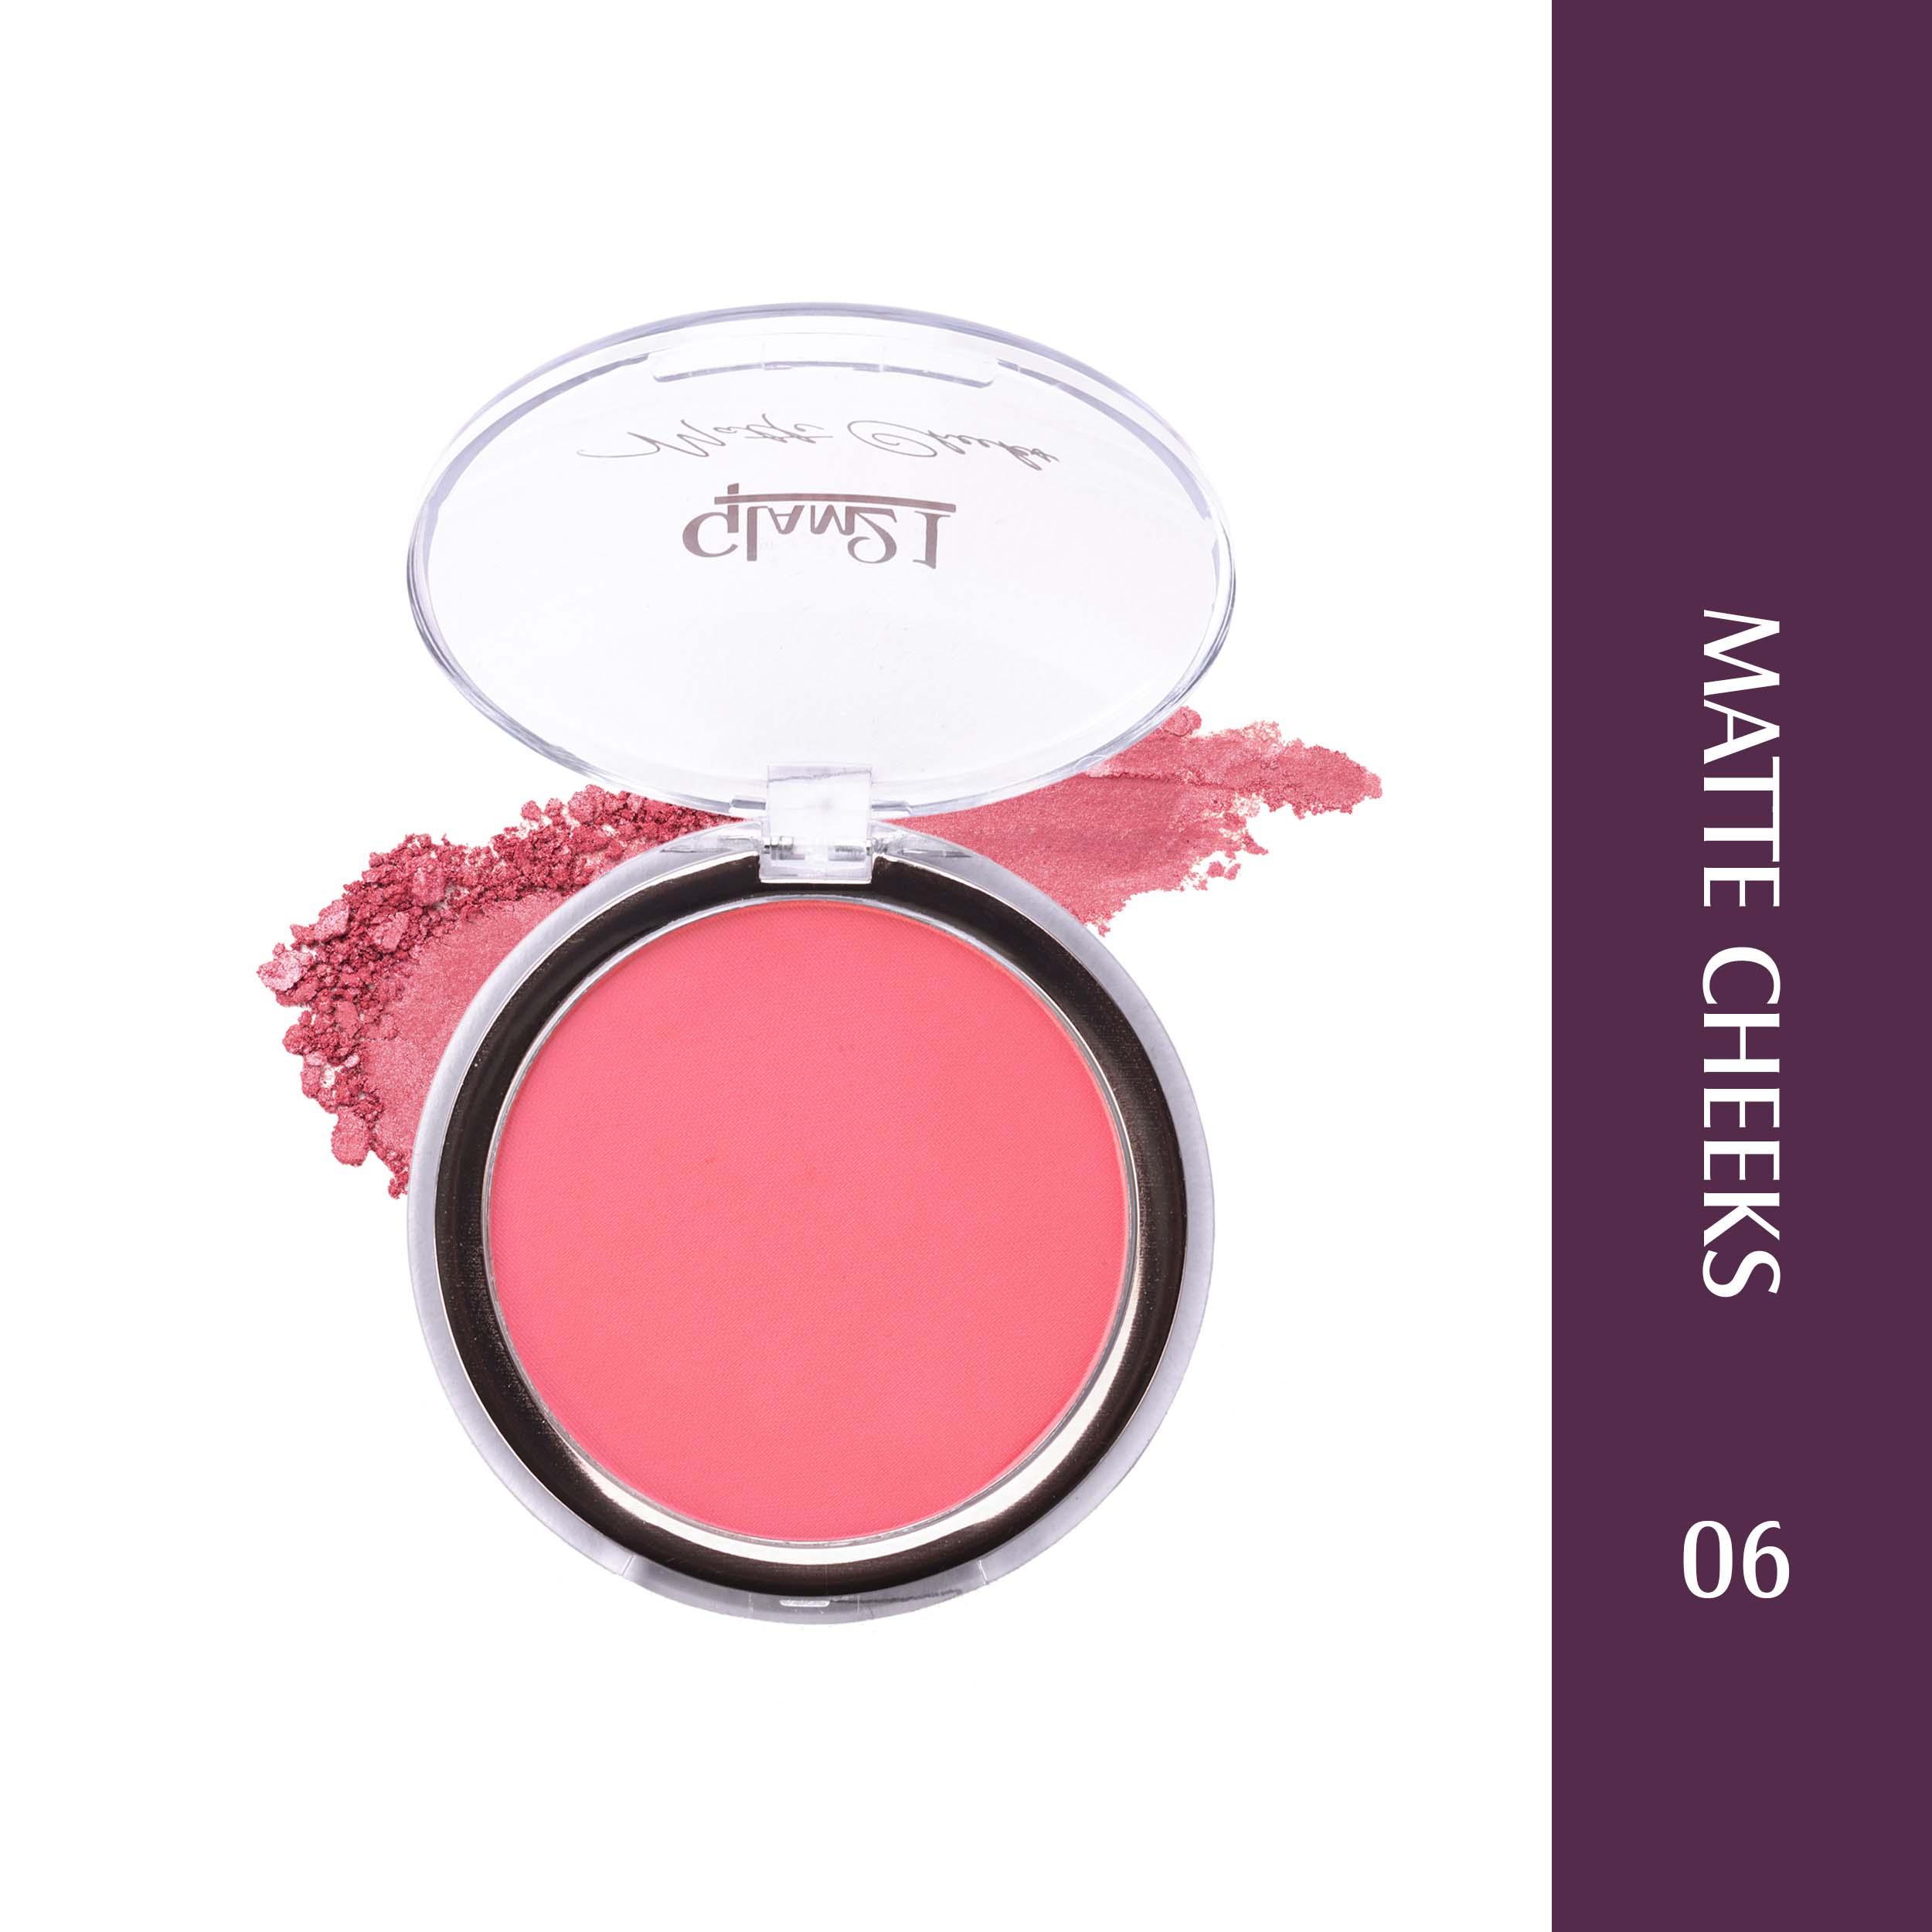 Glam21 Matte Cheek Blush | Perfect Pop of Color | Seamless Texture & Perfect Coverage, 5g  (Shade-06)